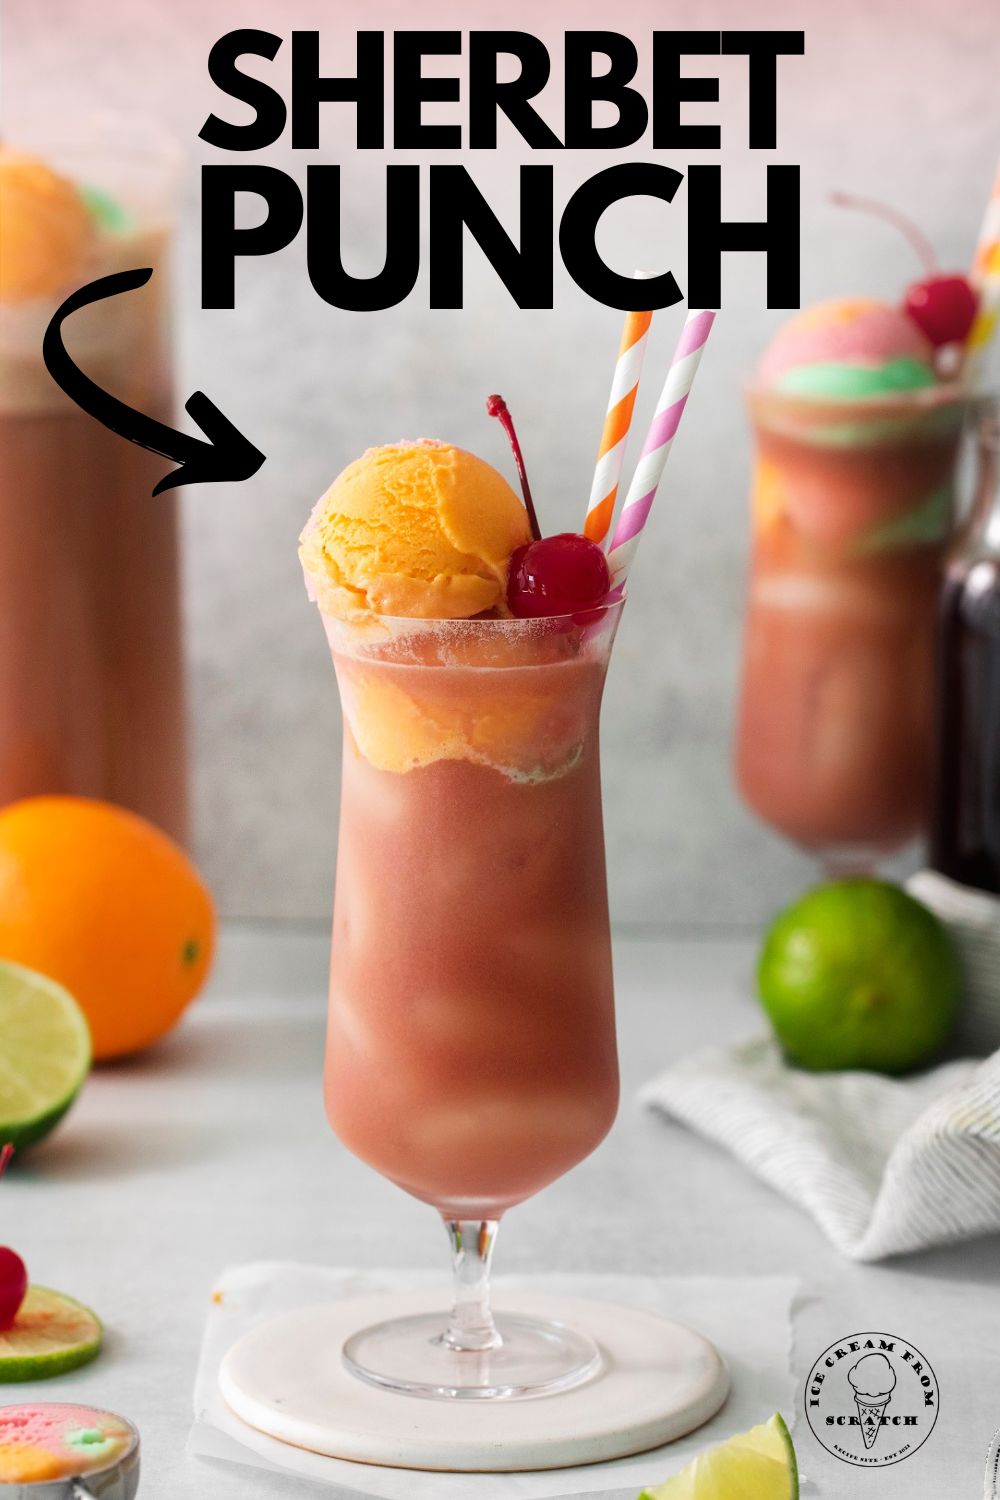 a tall footed glass of sherbet punch with scoops of orange sherbet on top along with a maraschino cherry. Text overlay at top of image says "sherbet punch" with an arrow pointing at the glass.